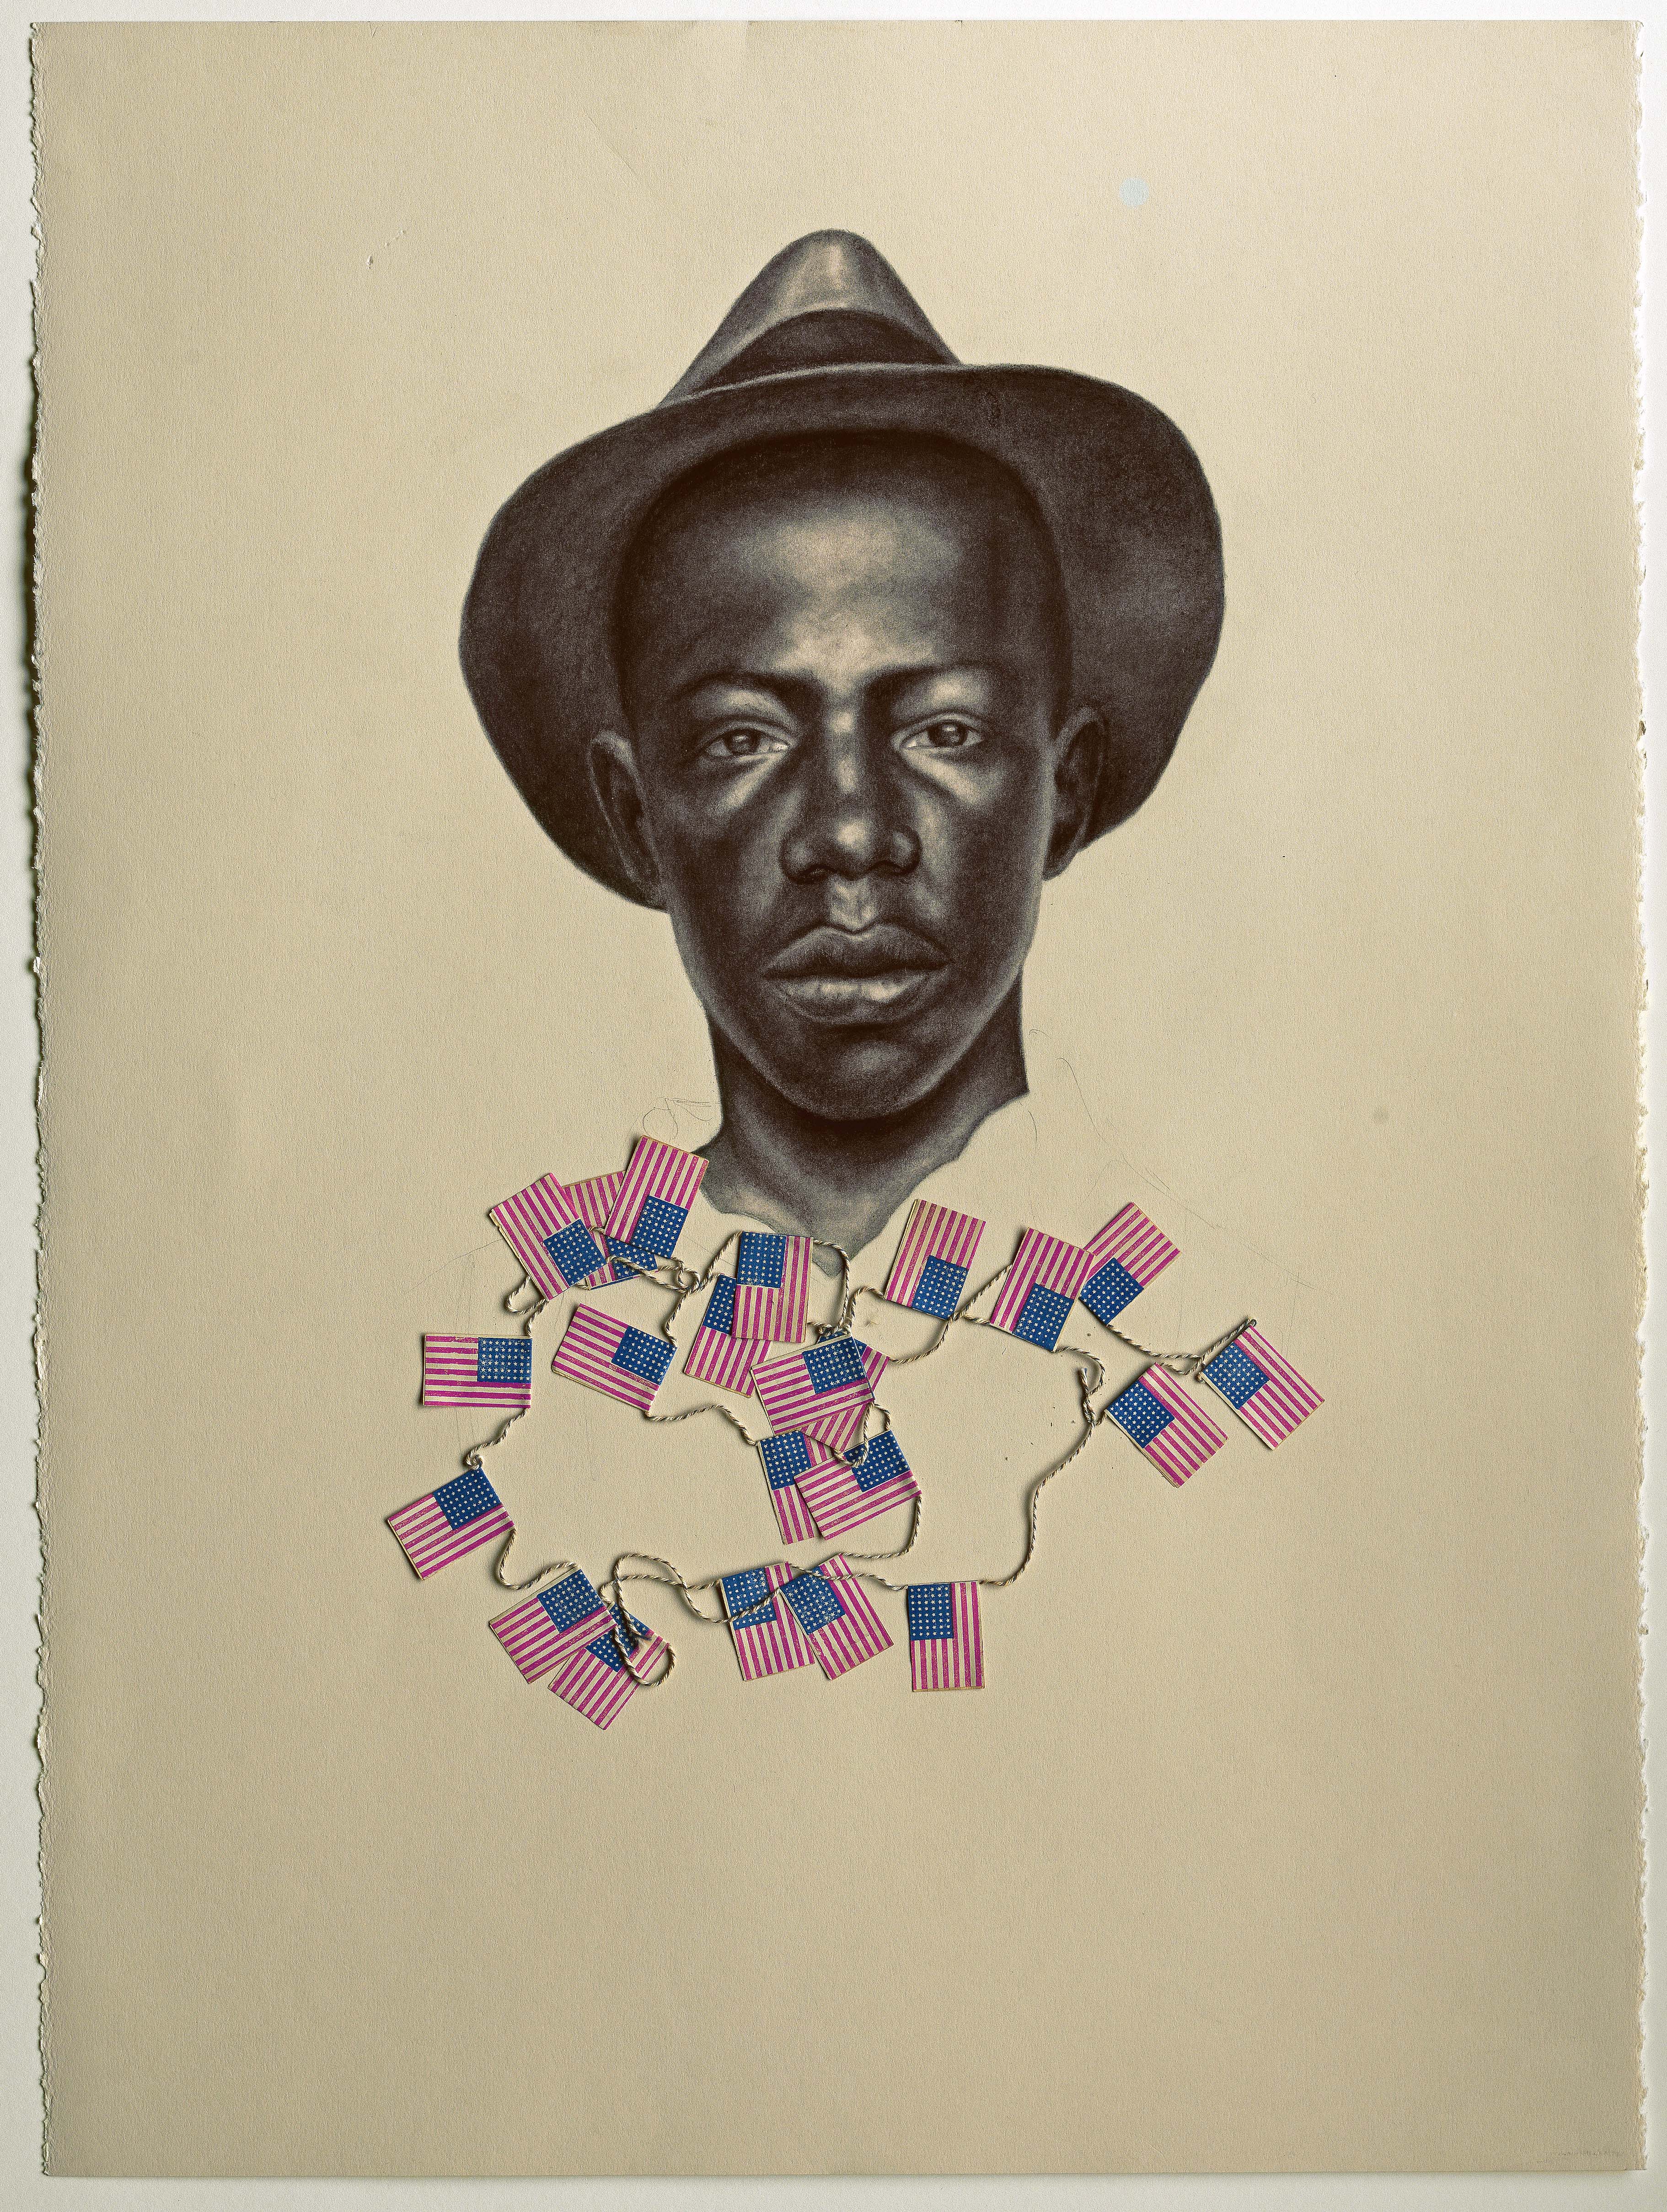 Detailed black and white portrait drawing of a Black man in a hat. A garland of paper flags is attached below this portrait.